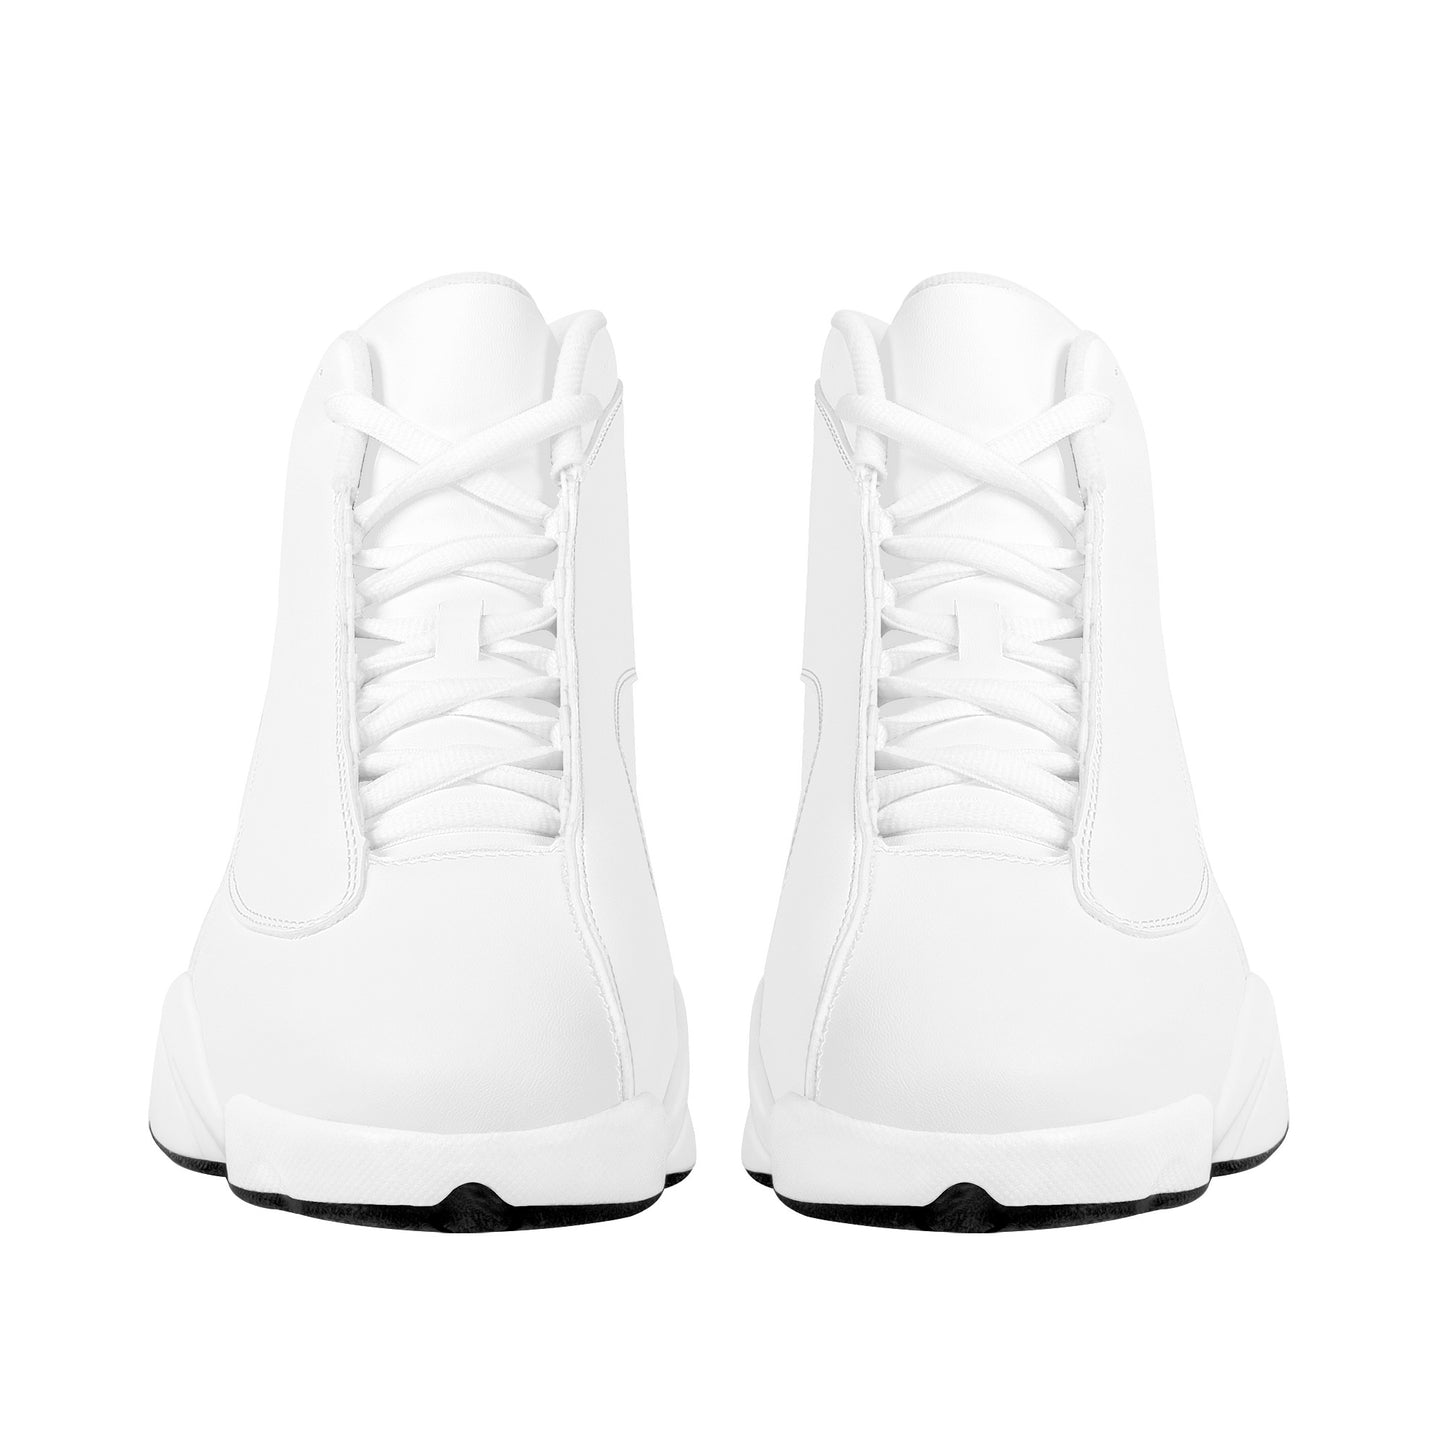 Create Your Own - Basketball Style Shoes - White - HayGoodies - basketball shoes